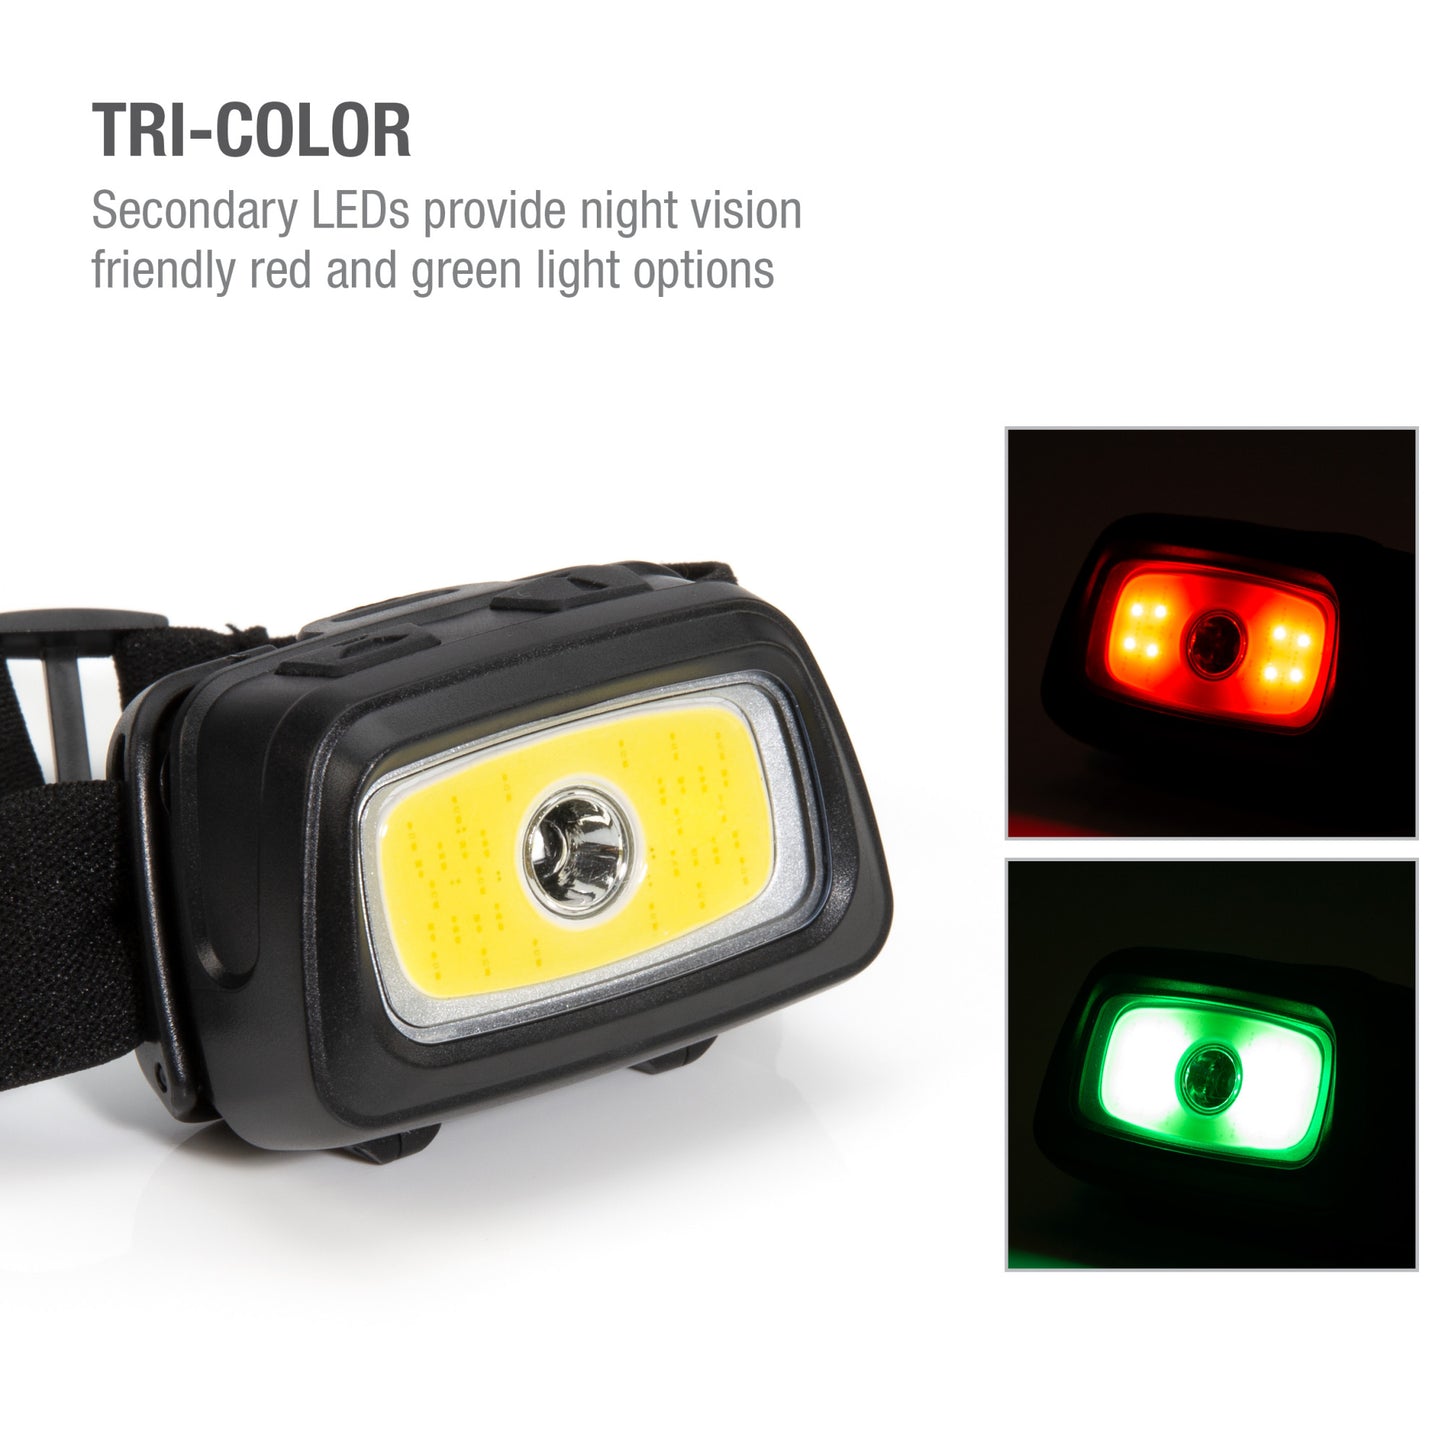 Multi-Mode Tri-Color LED Headlamp with Red Safety Light